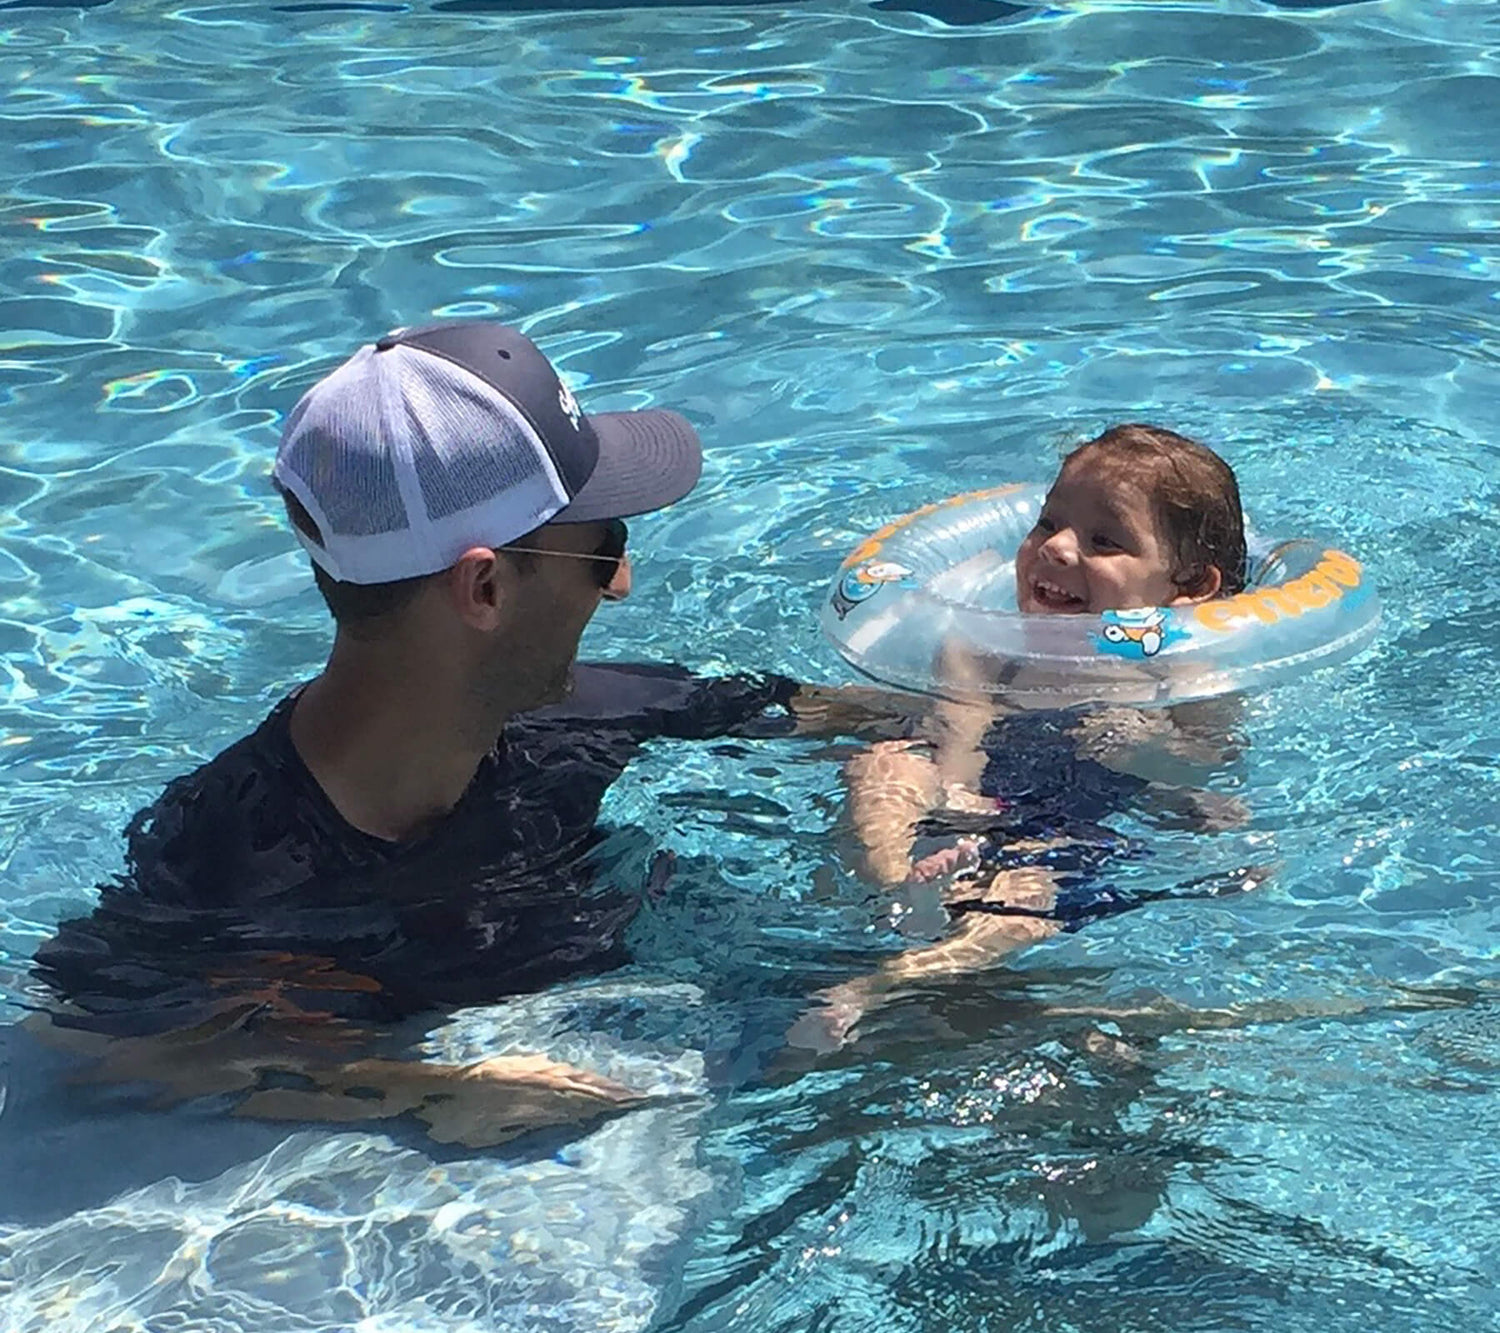 Toddler With Lissencephaly Feels "Free" in the Pool